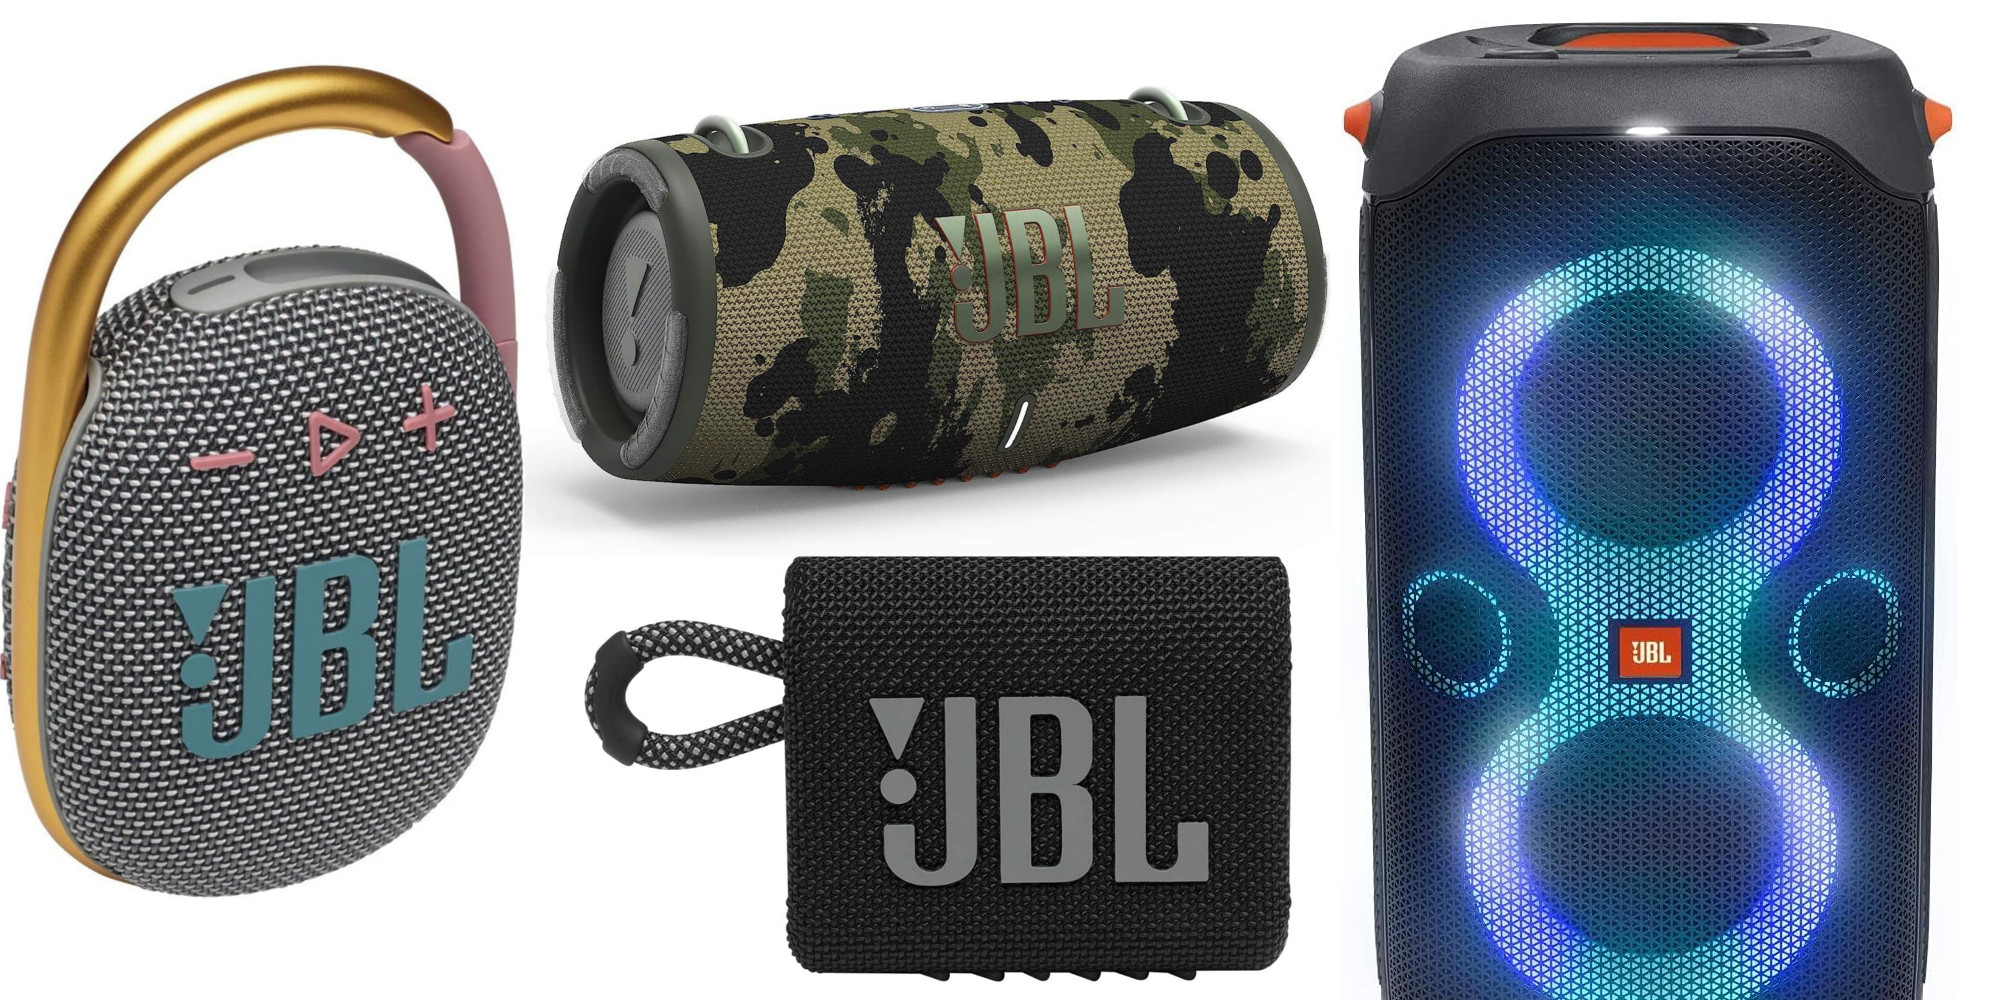 JBL Bluetooth speakers up to 50% off: Go 3, Clip 4, karaoke party